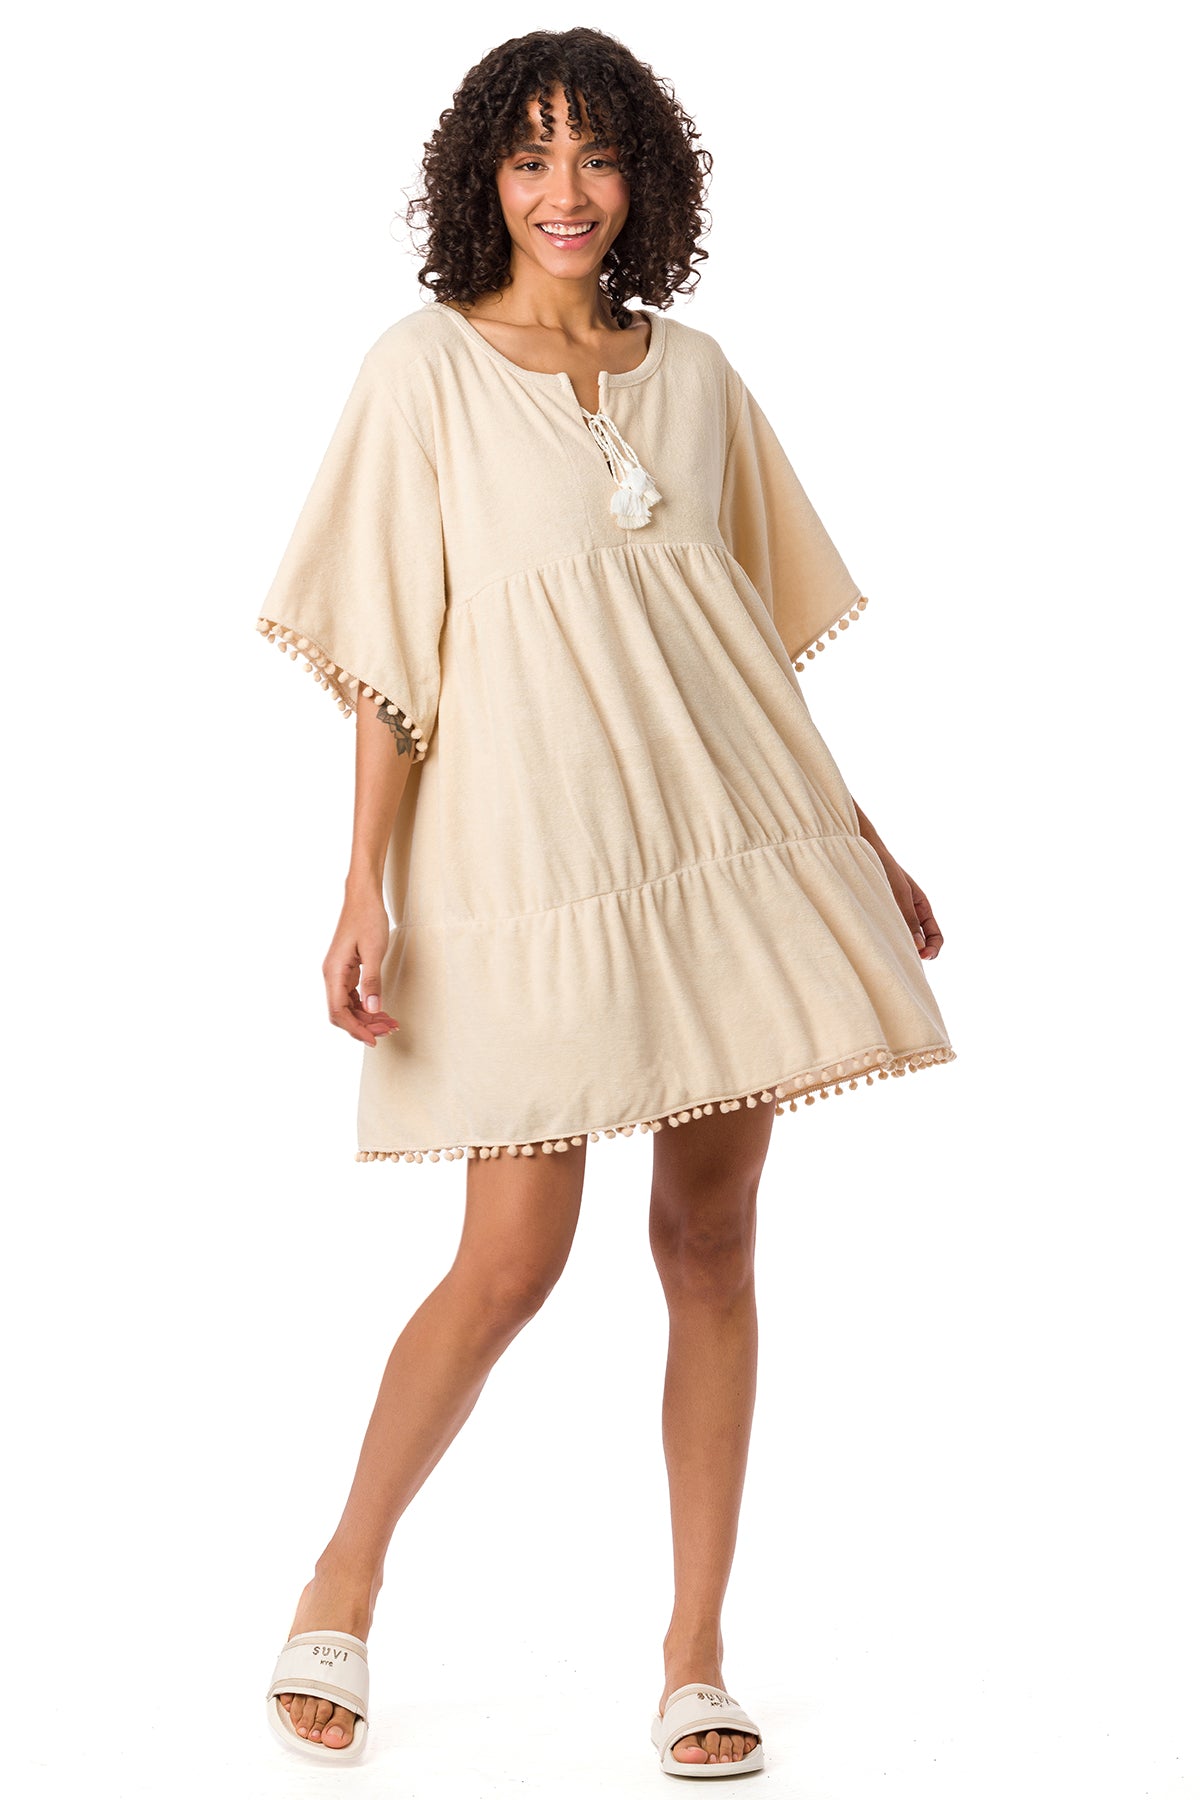 Suvi NYC women's beach-pool dress in Terry cotton Perfect for summer. outdoors or indoors.